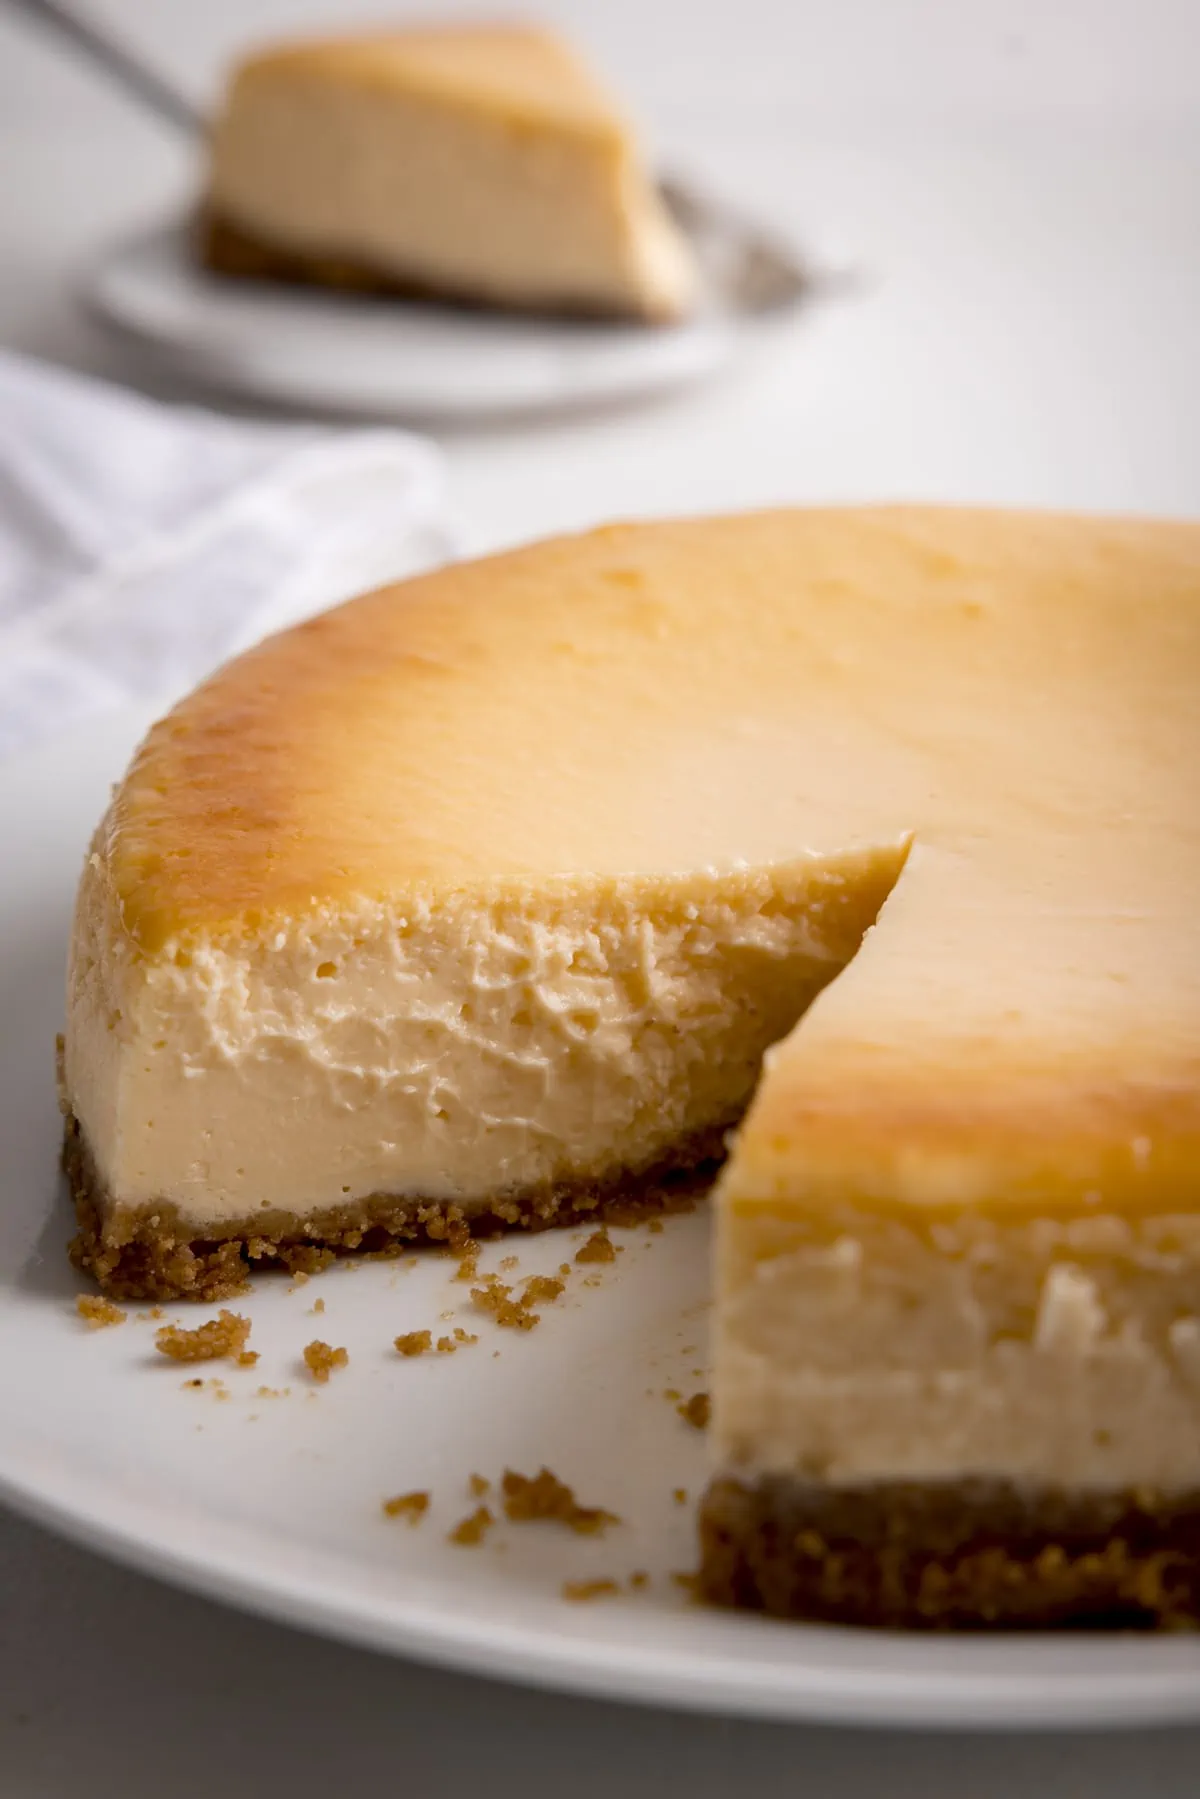 Plain New York Cheesecake on a light background with a slice taken out. The slice is on a plate in the background.